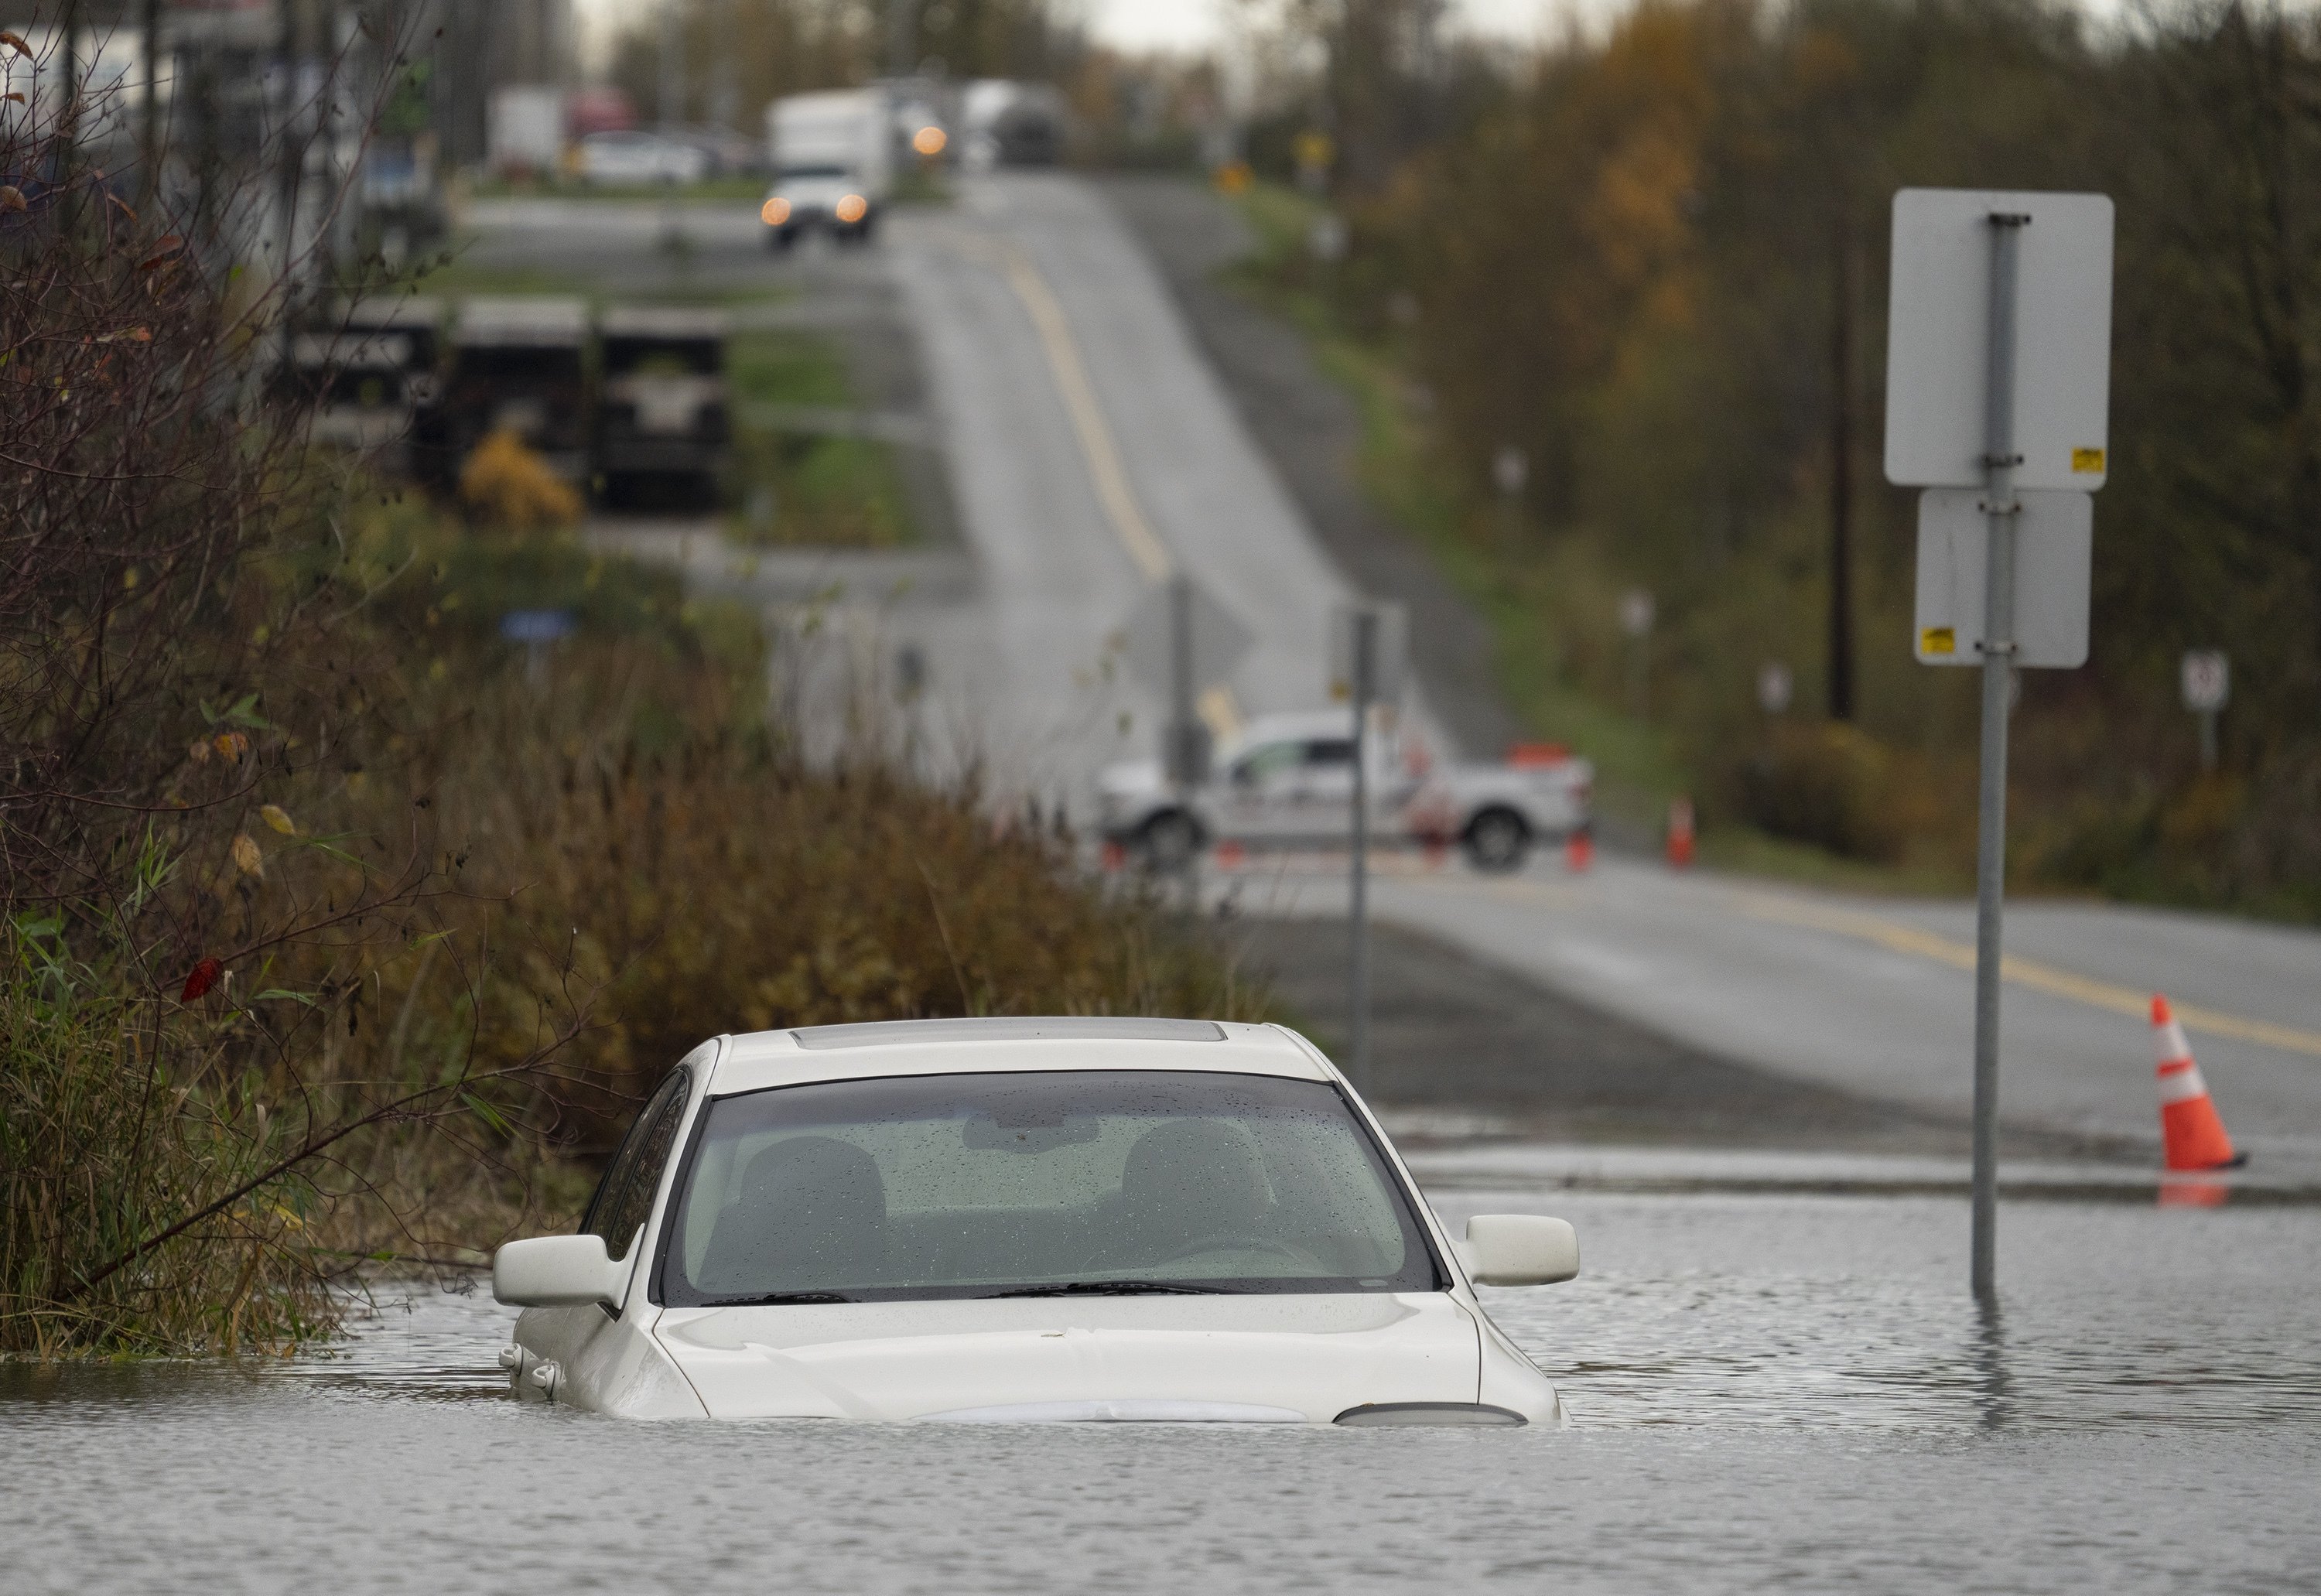 A vehicle is submerged in flood waters along a road in Abbotsford, British Columbia, Monday, Nov. 15, 2021. (Jonathan Hayward/The Canadian Press via AP)